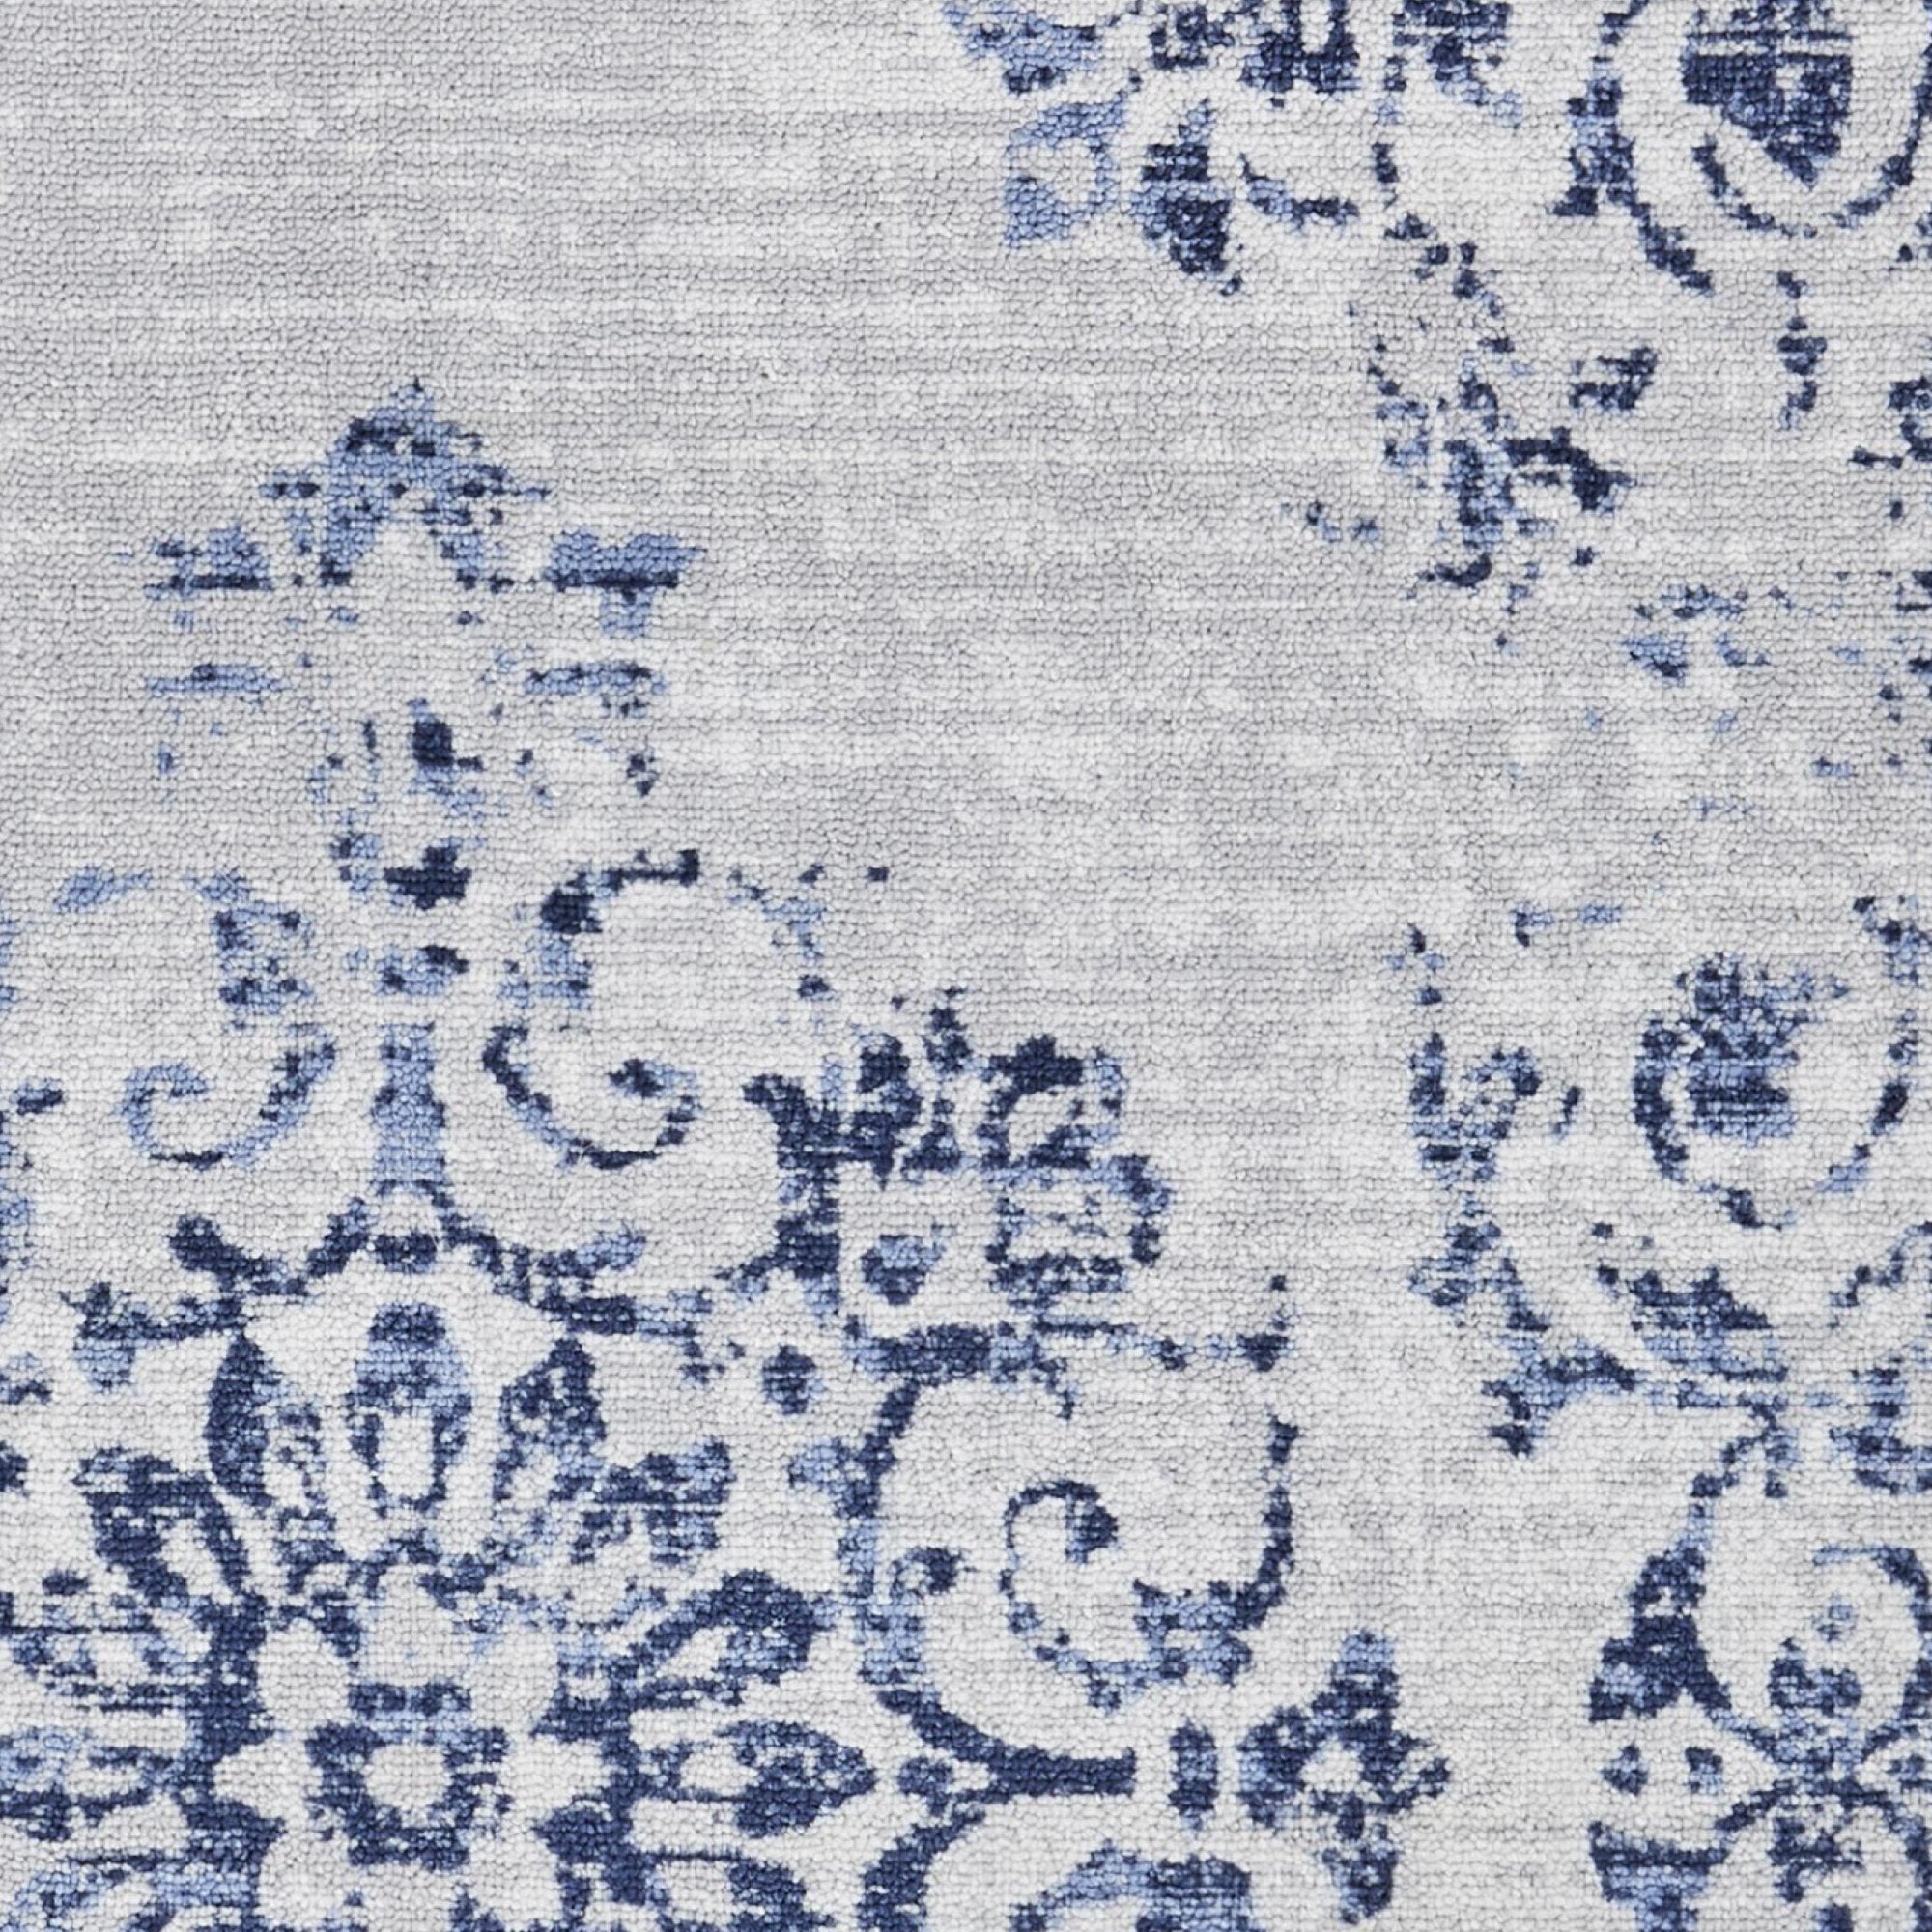 Washable Rug Faraday by Dreams & Drapes Design in Blue